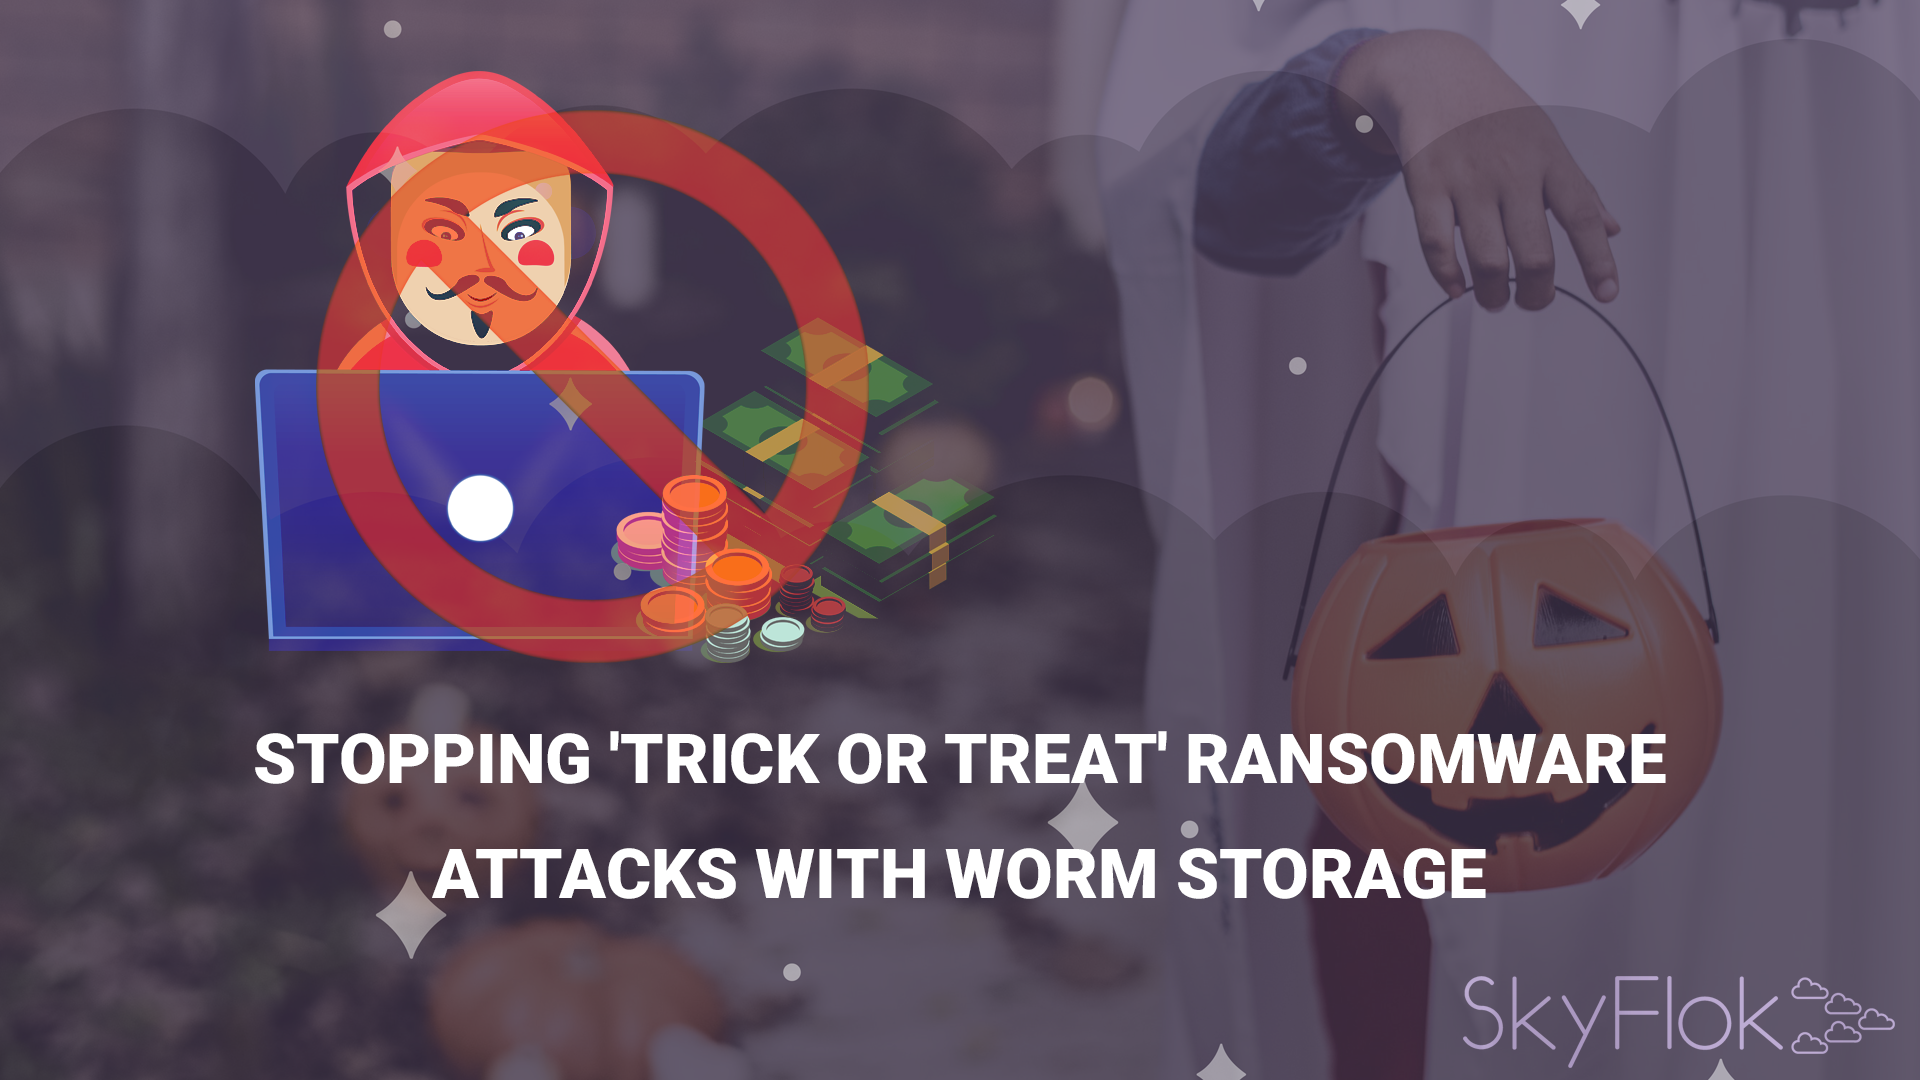 Stopping ‘Trick or Treat’ Ransomware Attacks